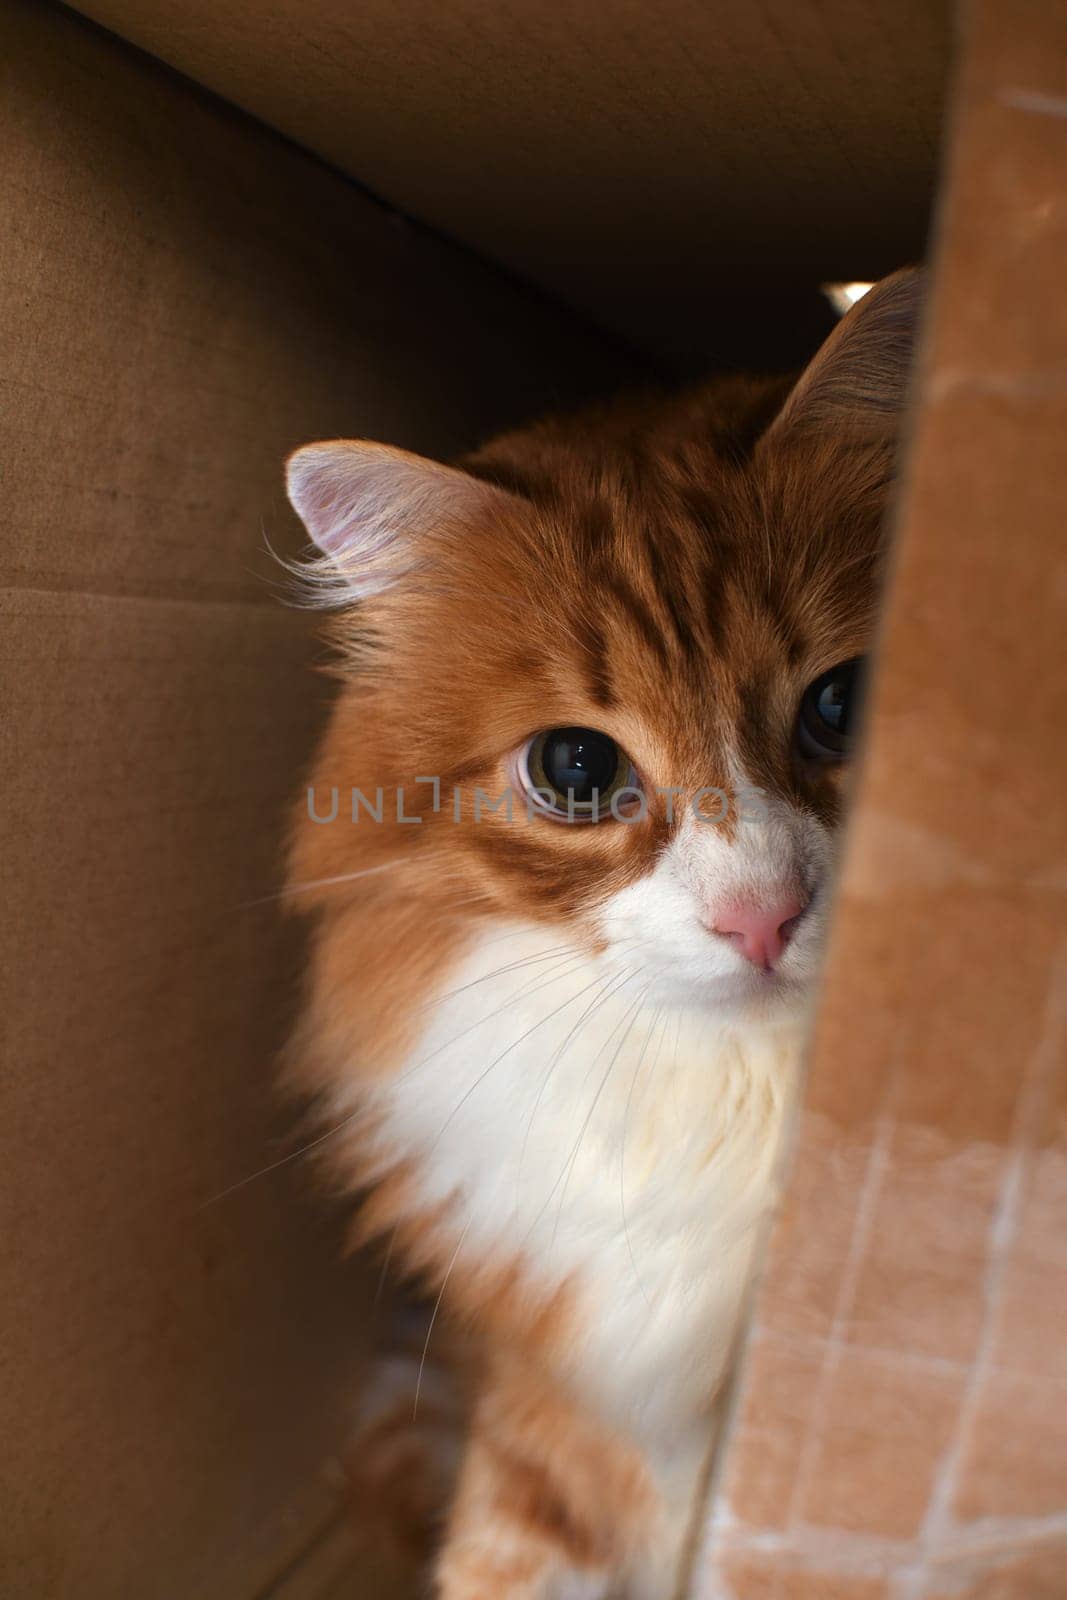 Cat in a cardboard box by Apolonia